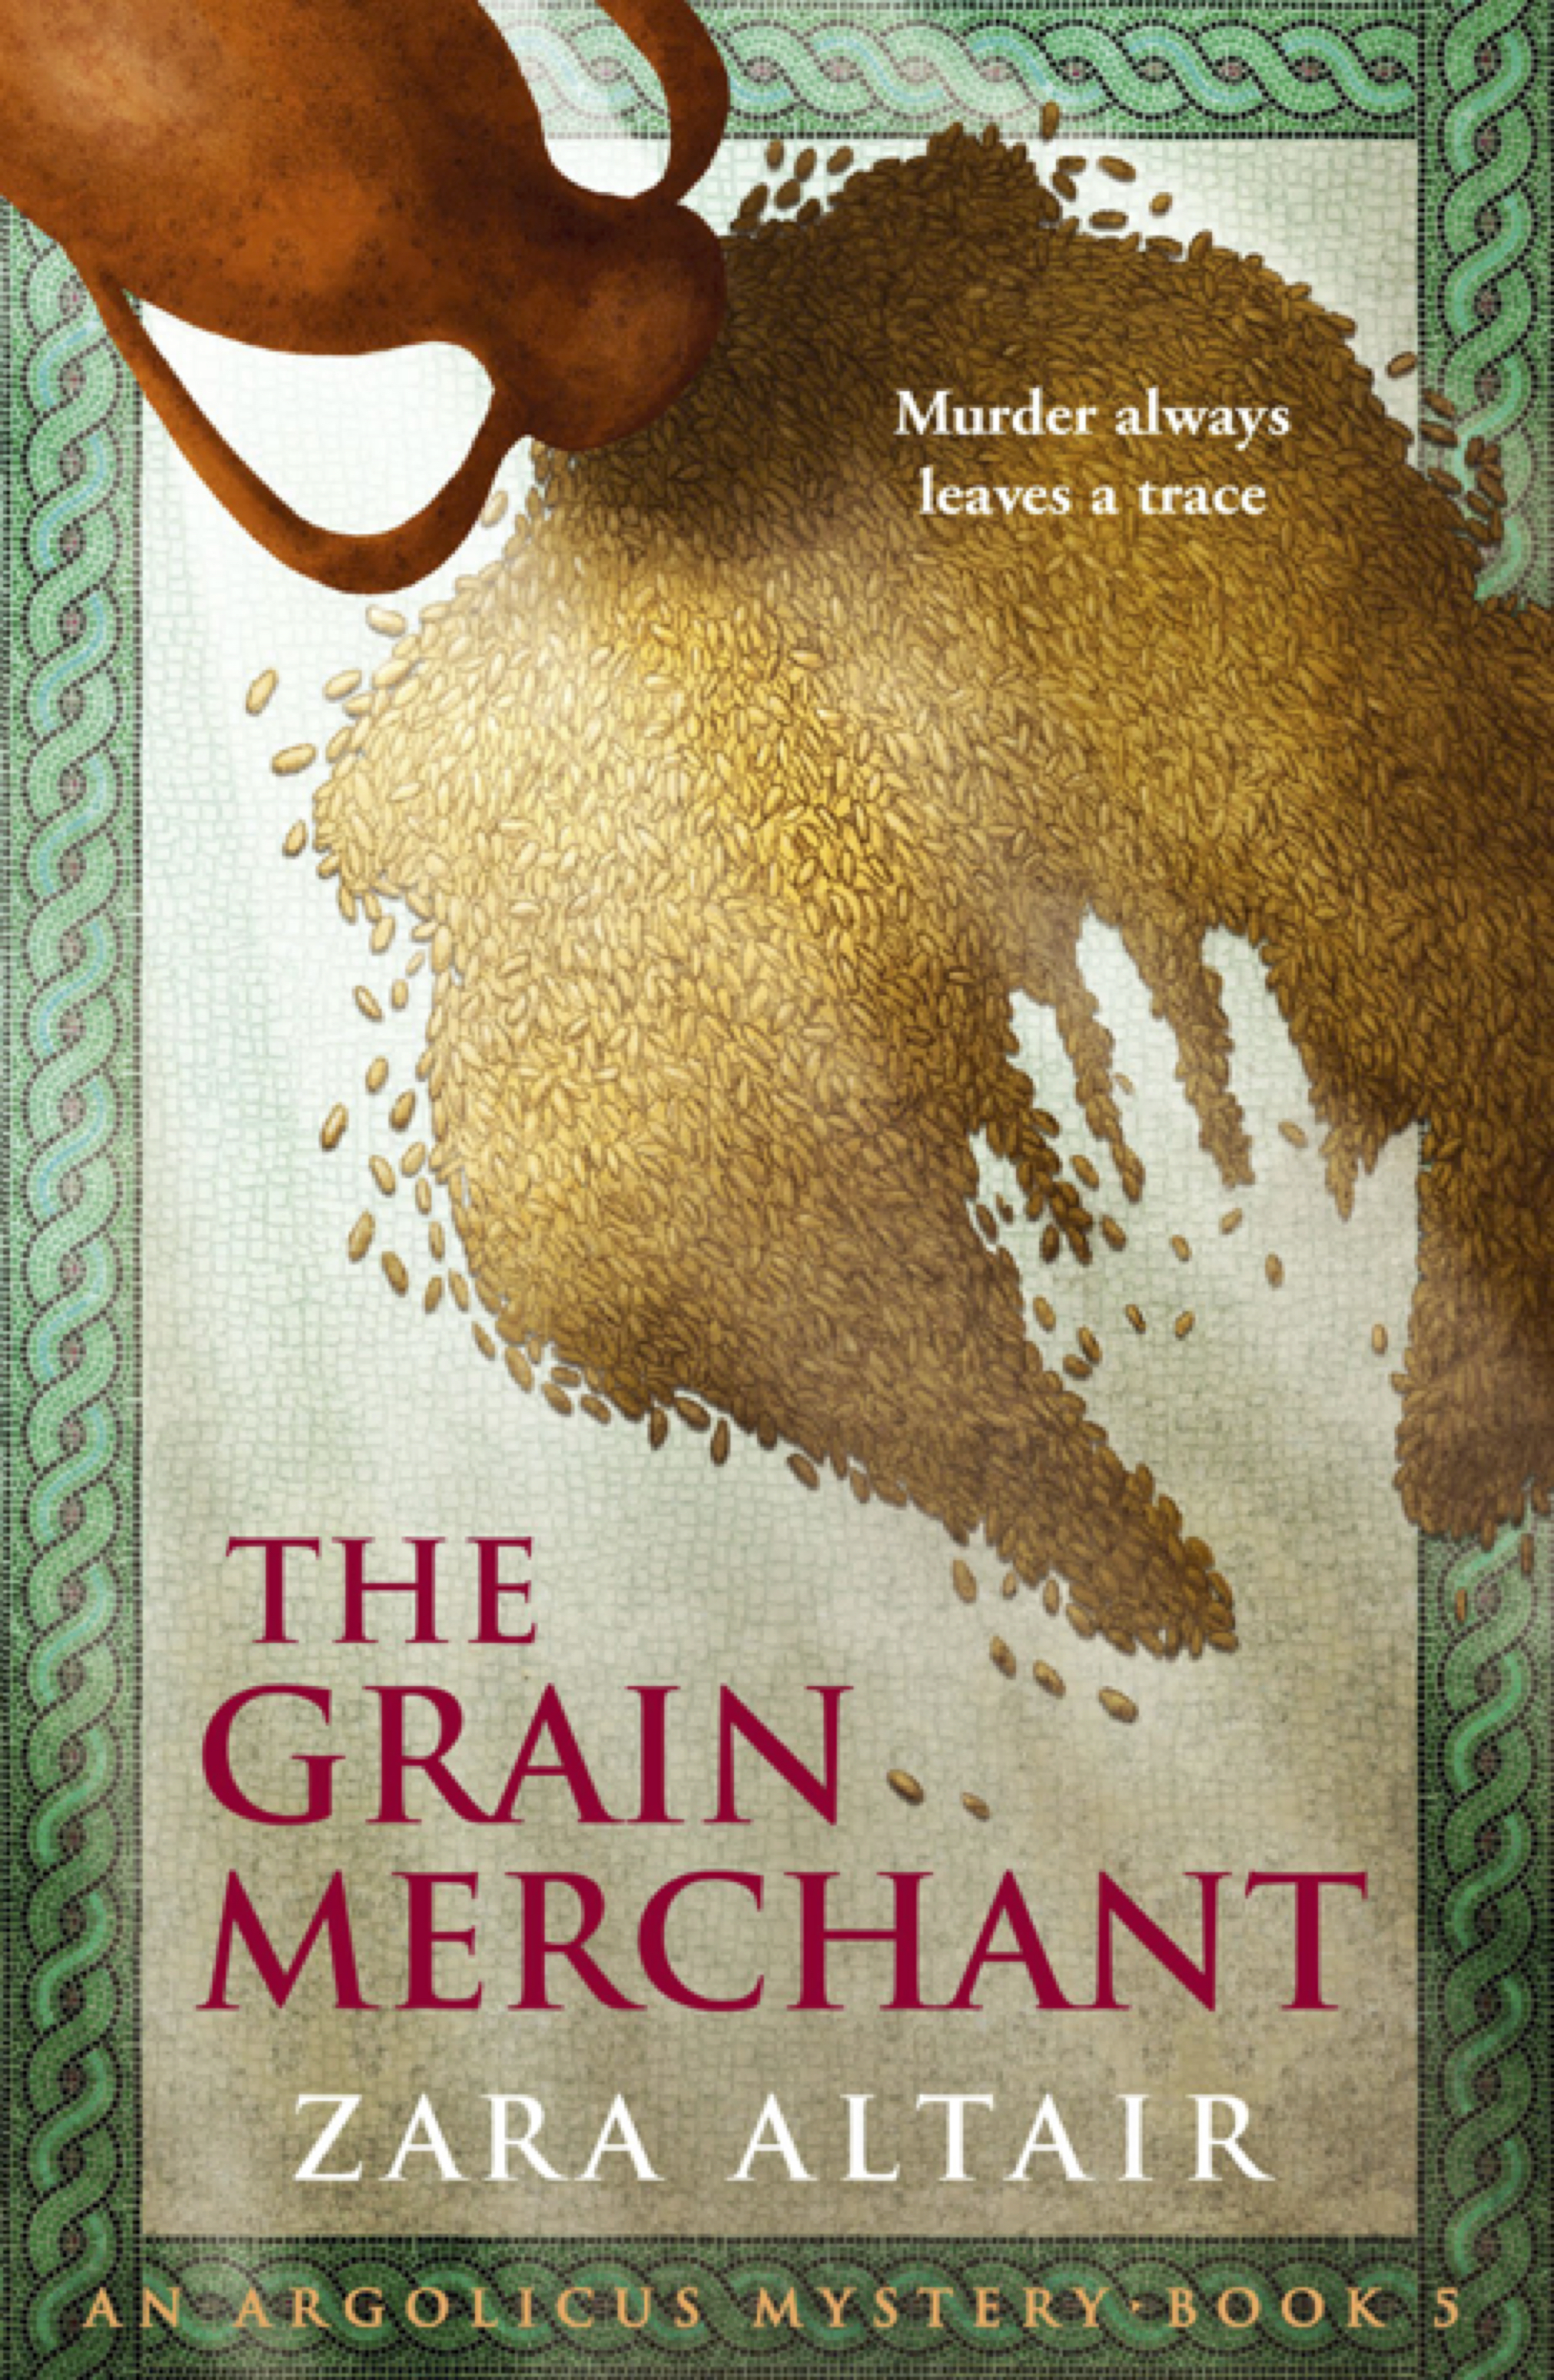 The Story Behind the Story: The Grain Merchant by Zara Altair